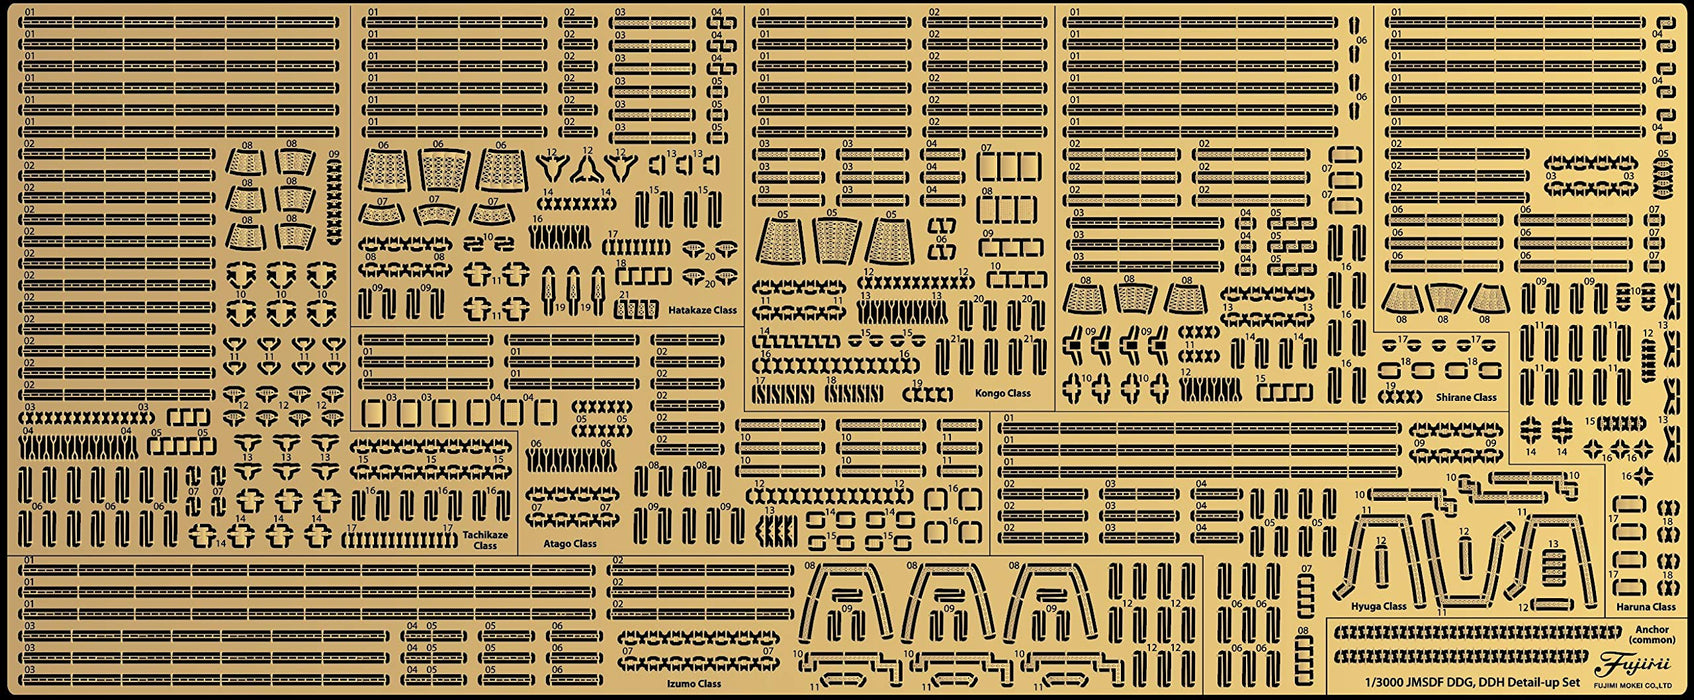 Fujimi Model 1/3000 Detail Up Parts Series No.8 1/3000 Maritime Self-Defense Force Destroyer (Ddh Type + Ddg Type) Genuine Etching Parts